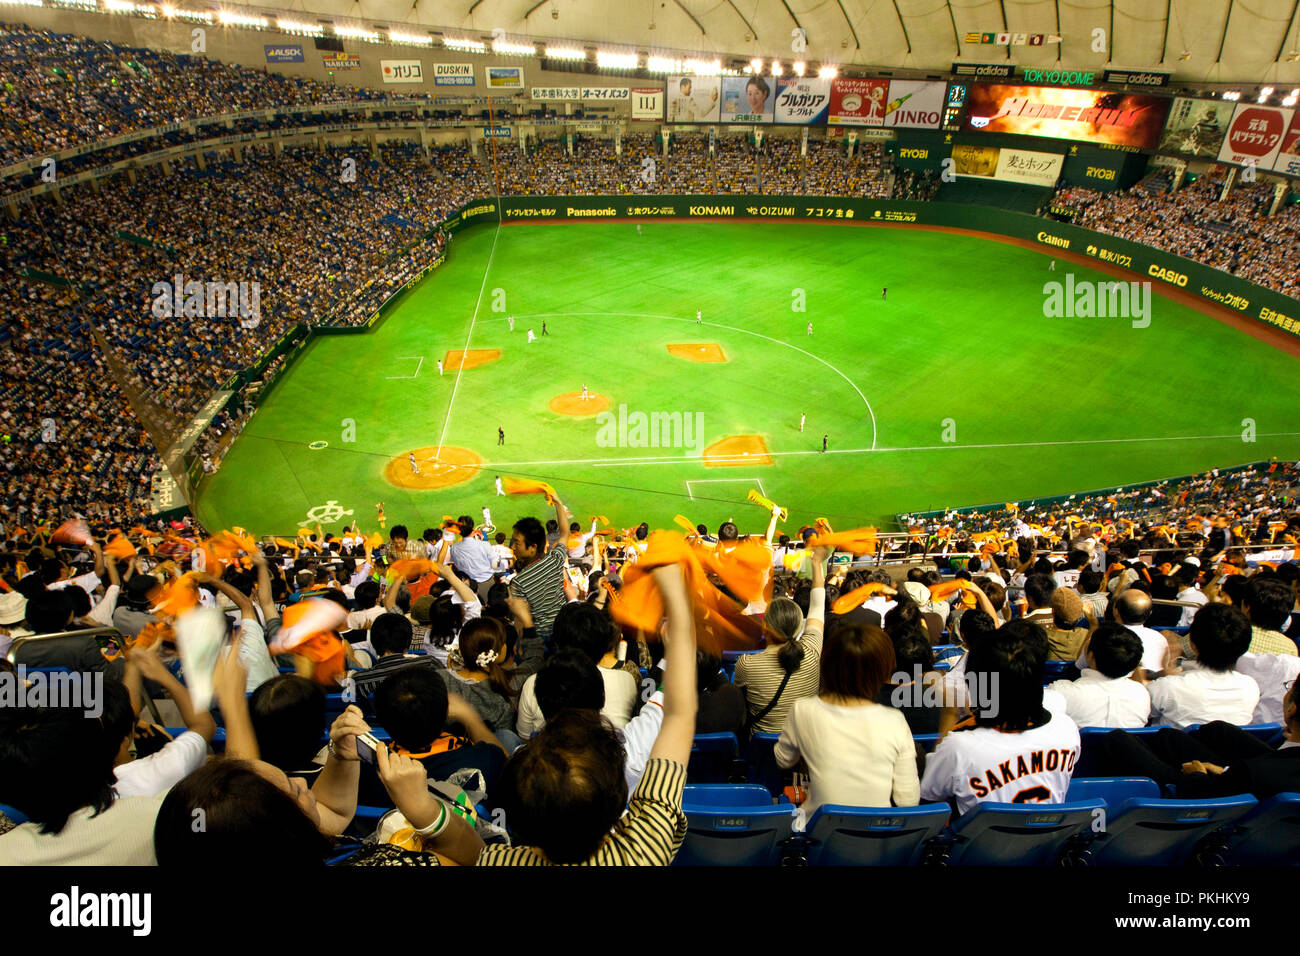 Tokyo Dome baseball stadium in Tokyo on Sept. 17, 2009. Fans wave orange banners for their team the Yomiuri Giants. Wide angle view from top Stock Photo